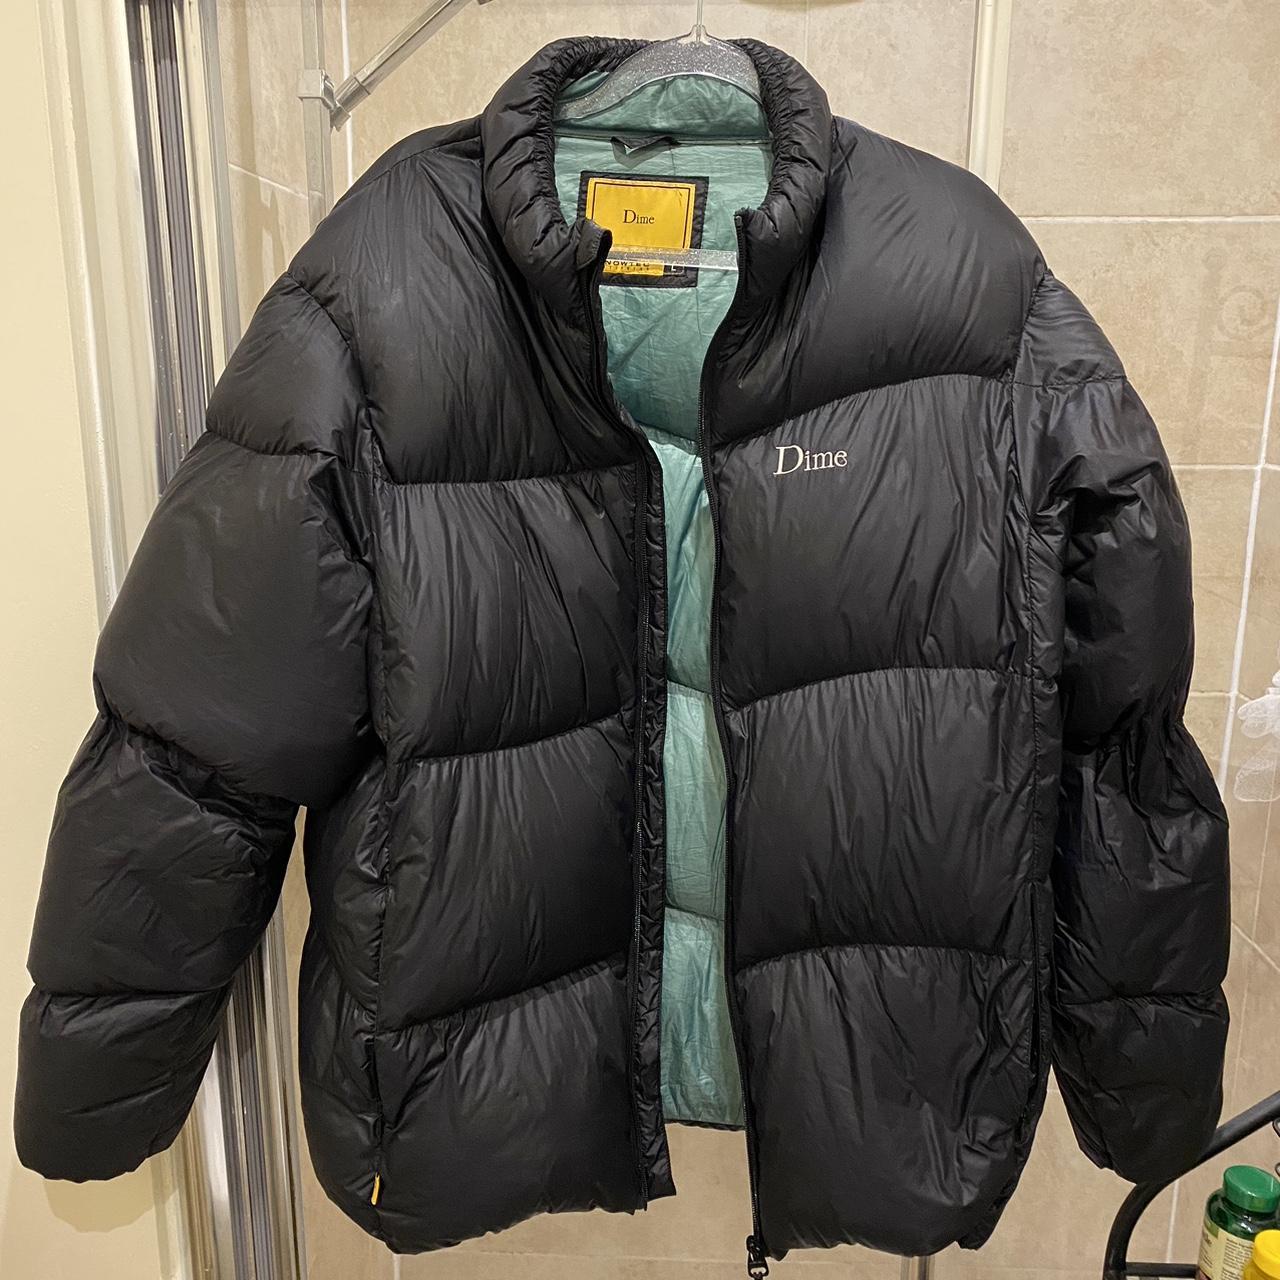 DIME Midweight wave puffer jacket, OPEN TO OFFERS!